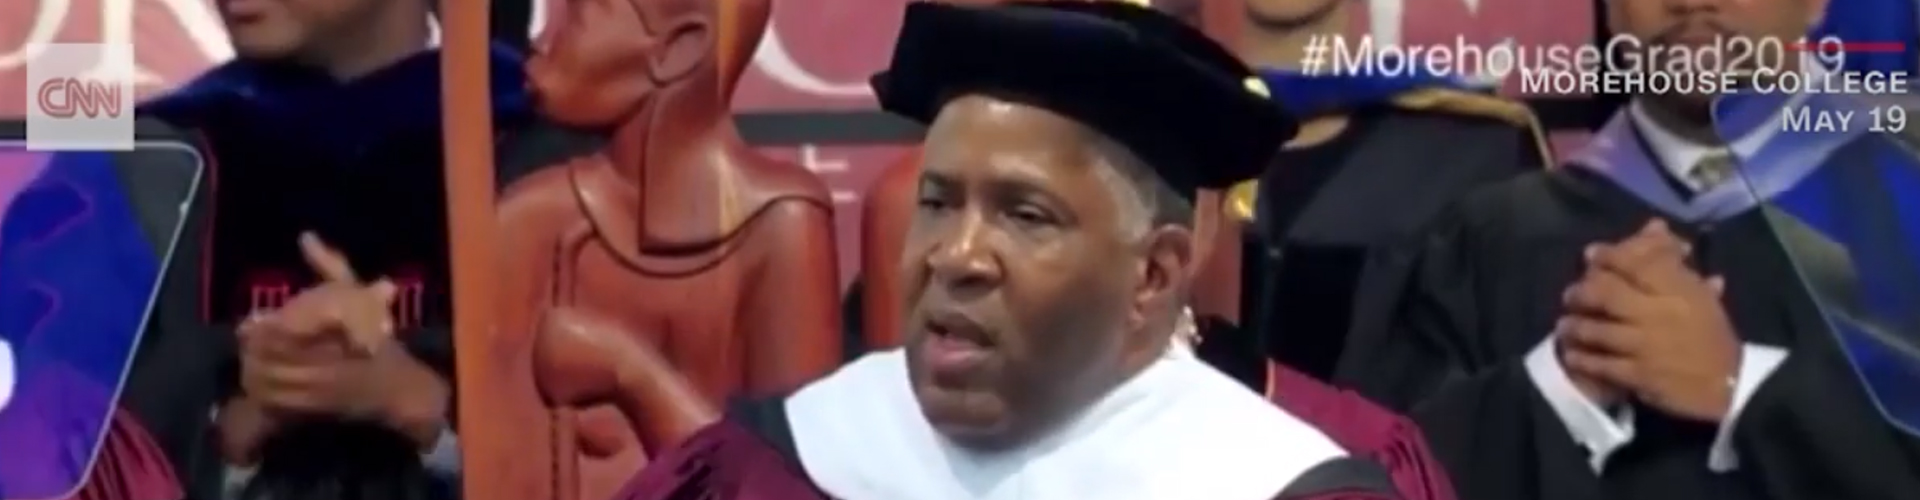 Morehouse College grads are surprised by a billionaire’s promise to pay off their student loans